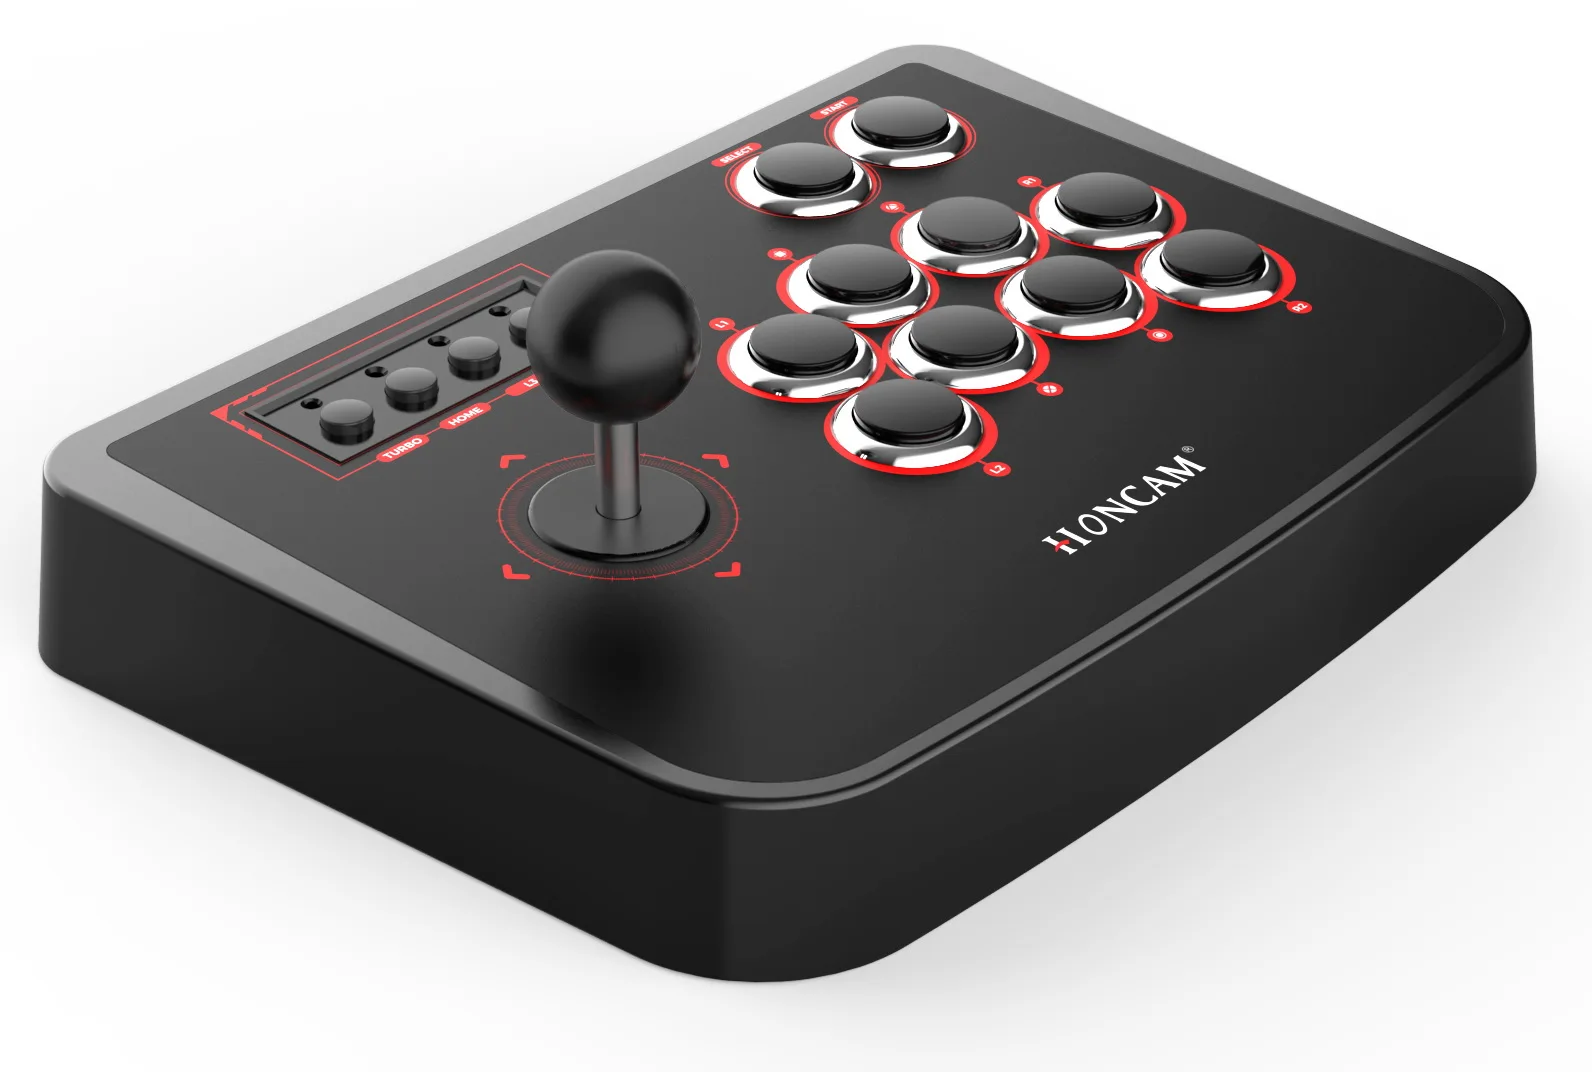 Usb Arcade Fight Stick For Ps4 For Ps3 For Nintendo Switch And Pc Game Accessories Joystick - Buy Arcade Fight Stick For Ps4,Arcade Gamepad For Ps3,Usb Fighting Joystick For Nintendo Switch